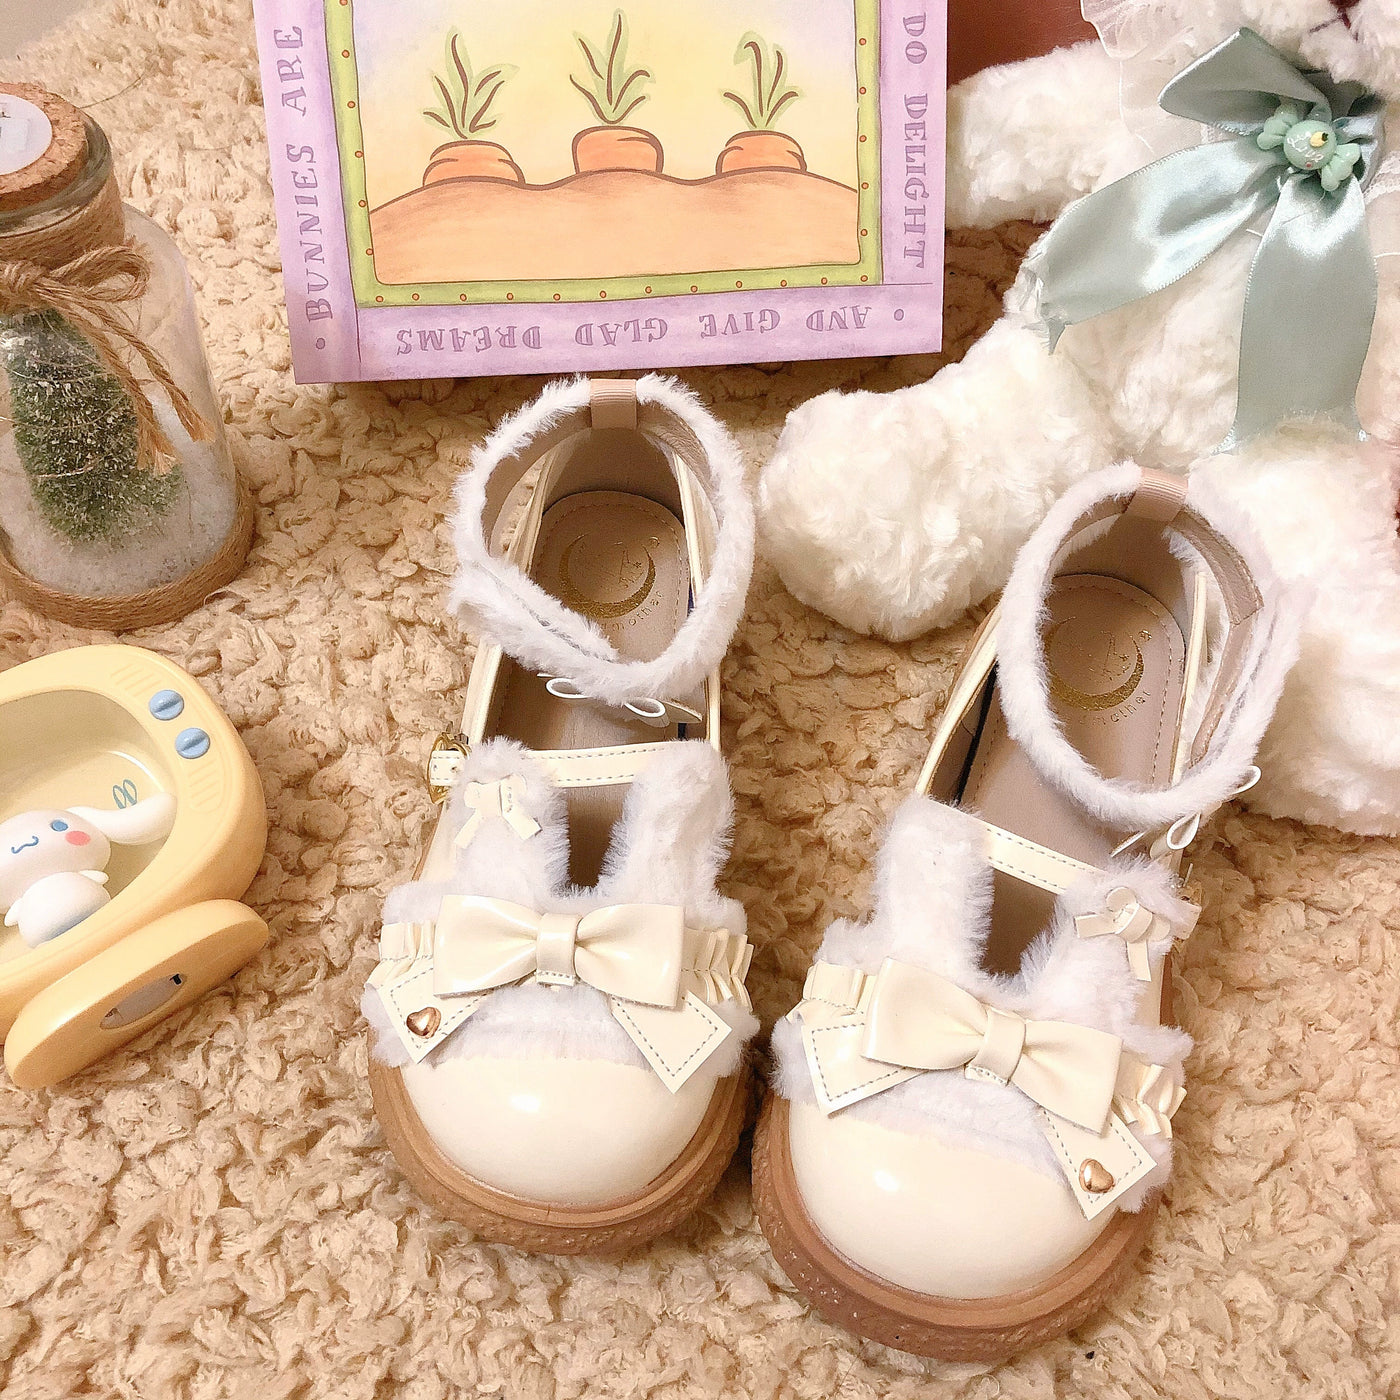 Fairy Godmother~Winter Girly Lolita Shoes Lolita Ankle Strap Shoes   